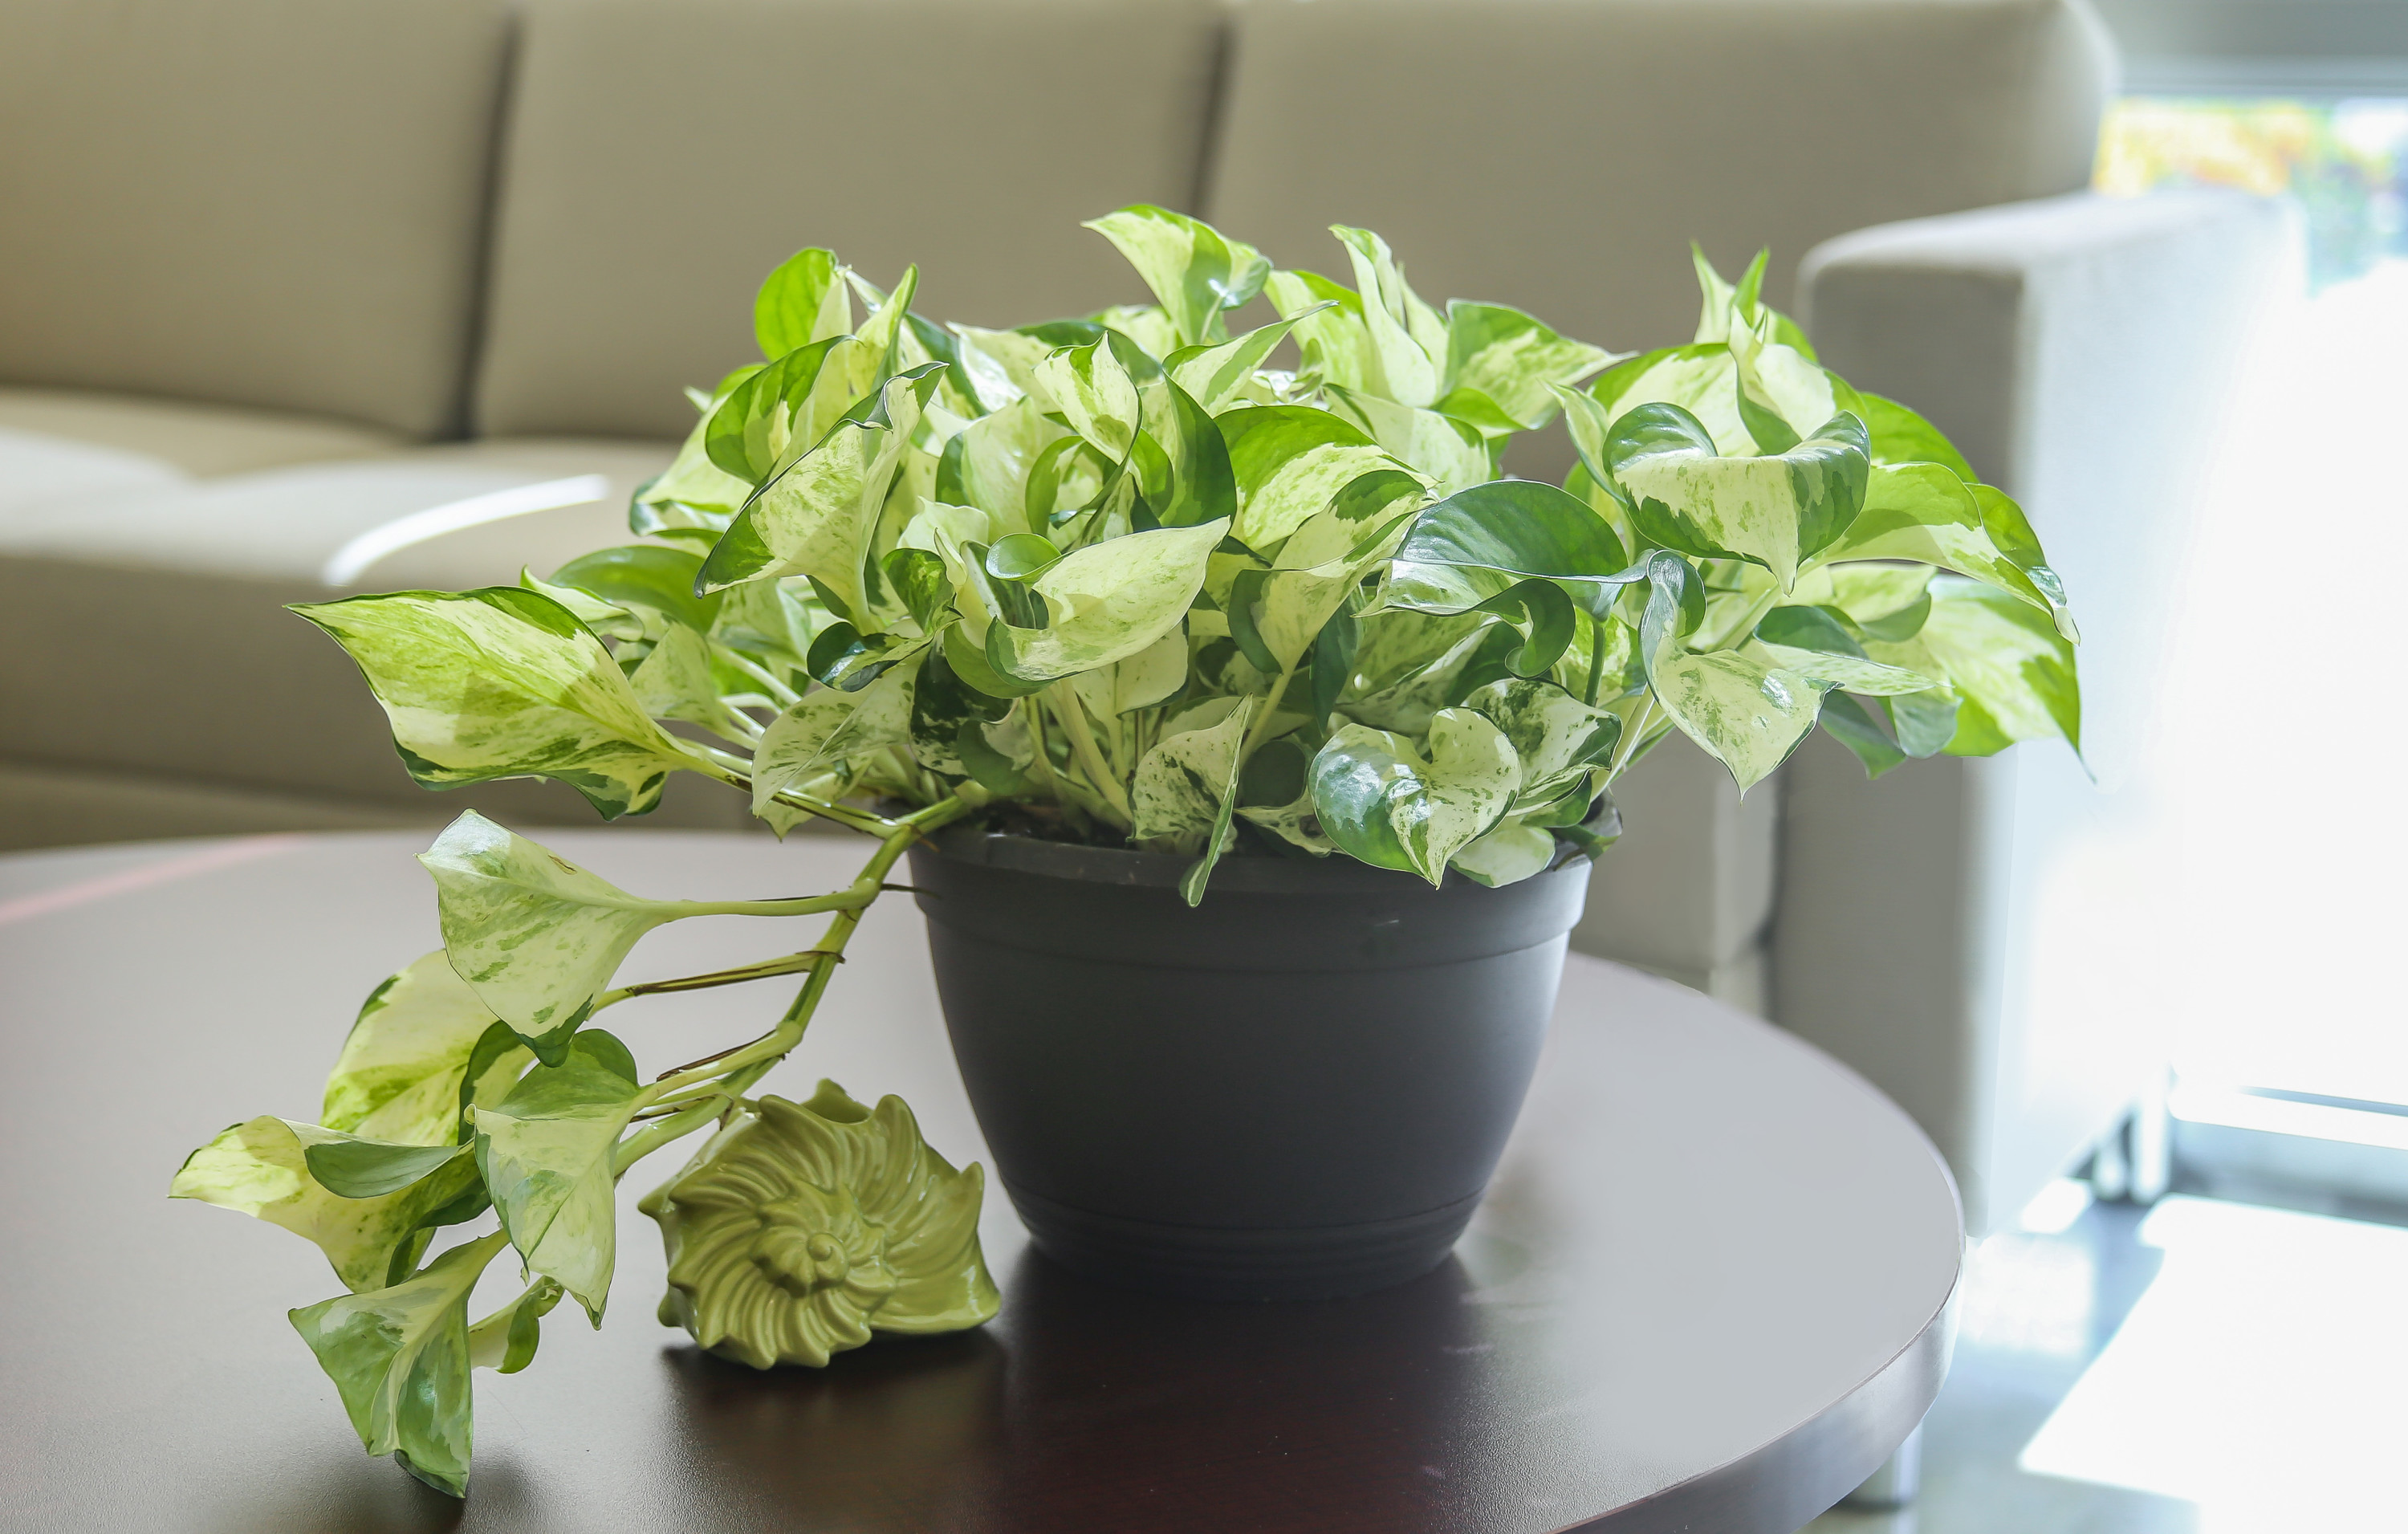 Costa Farms Live Indoor 10in. Tall Devil's Ivy Pothos; Medium, Indirect Light Plant in 6in. Grower Pot - image 5 of 11